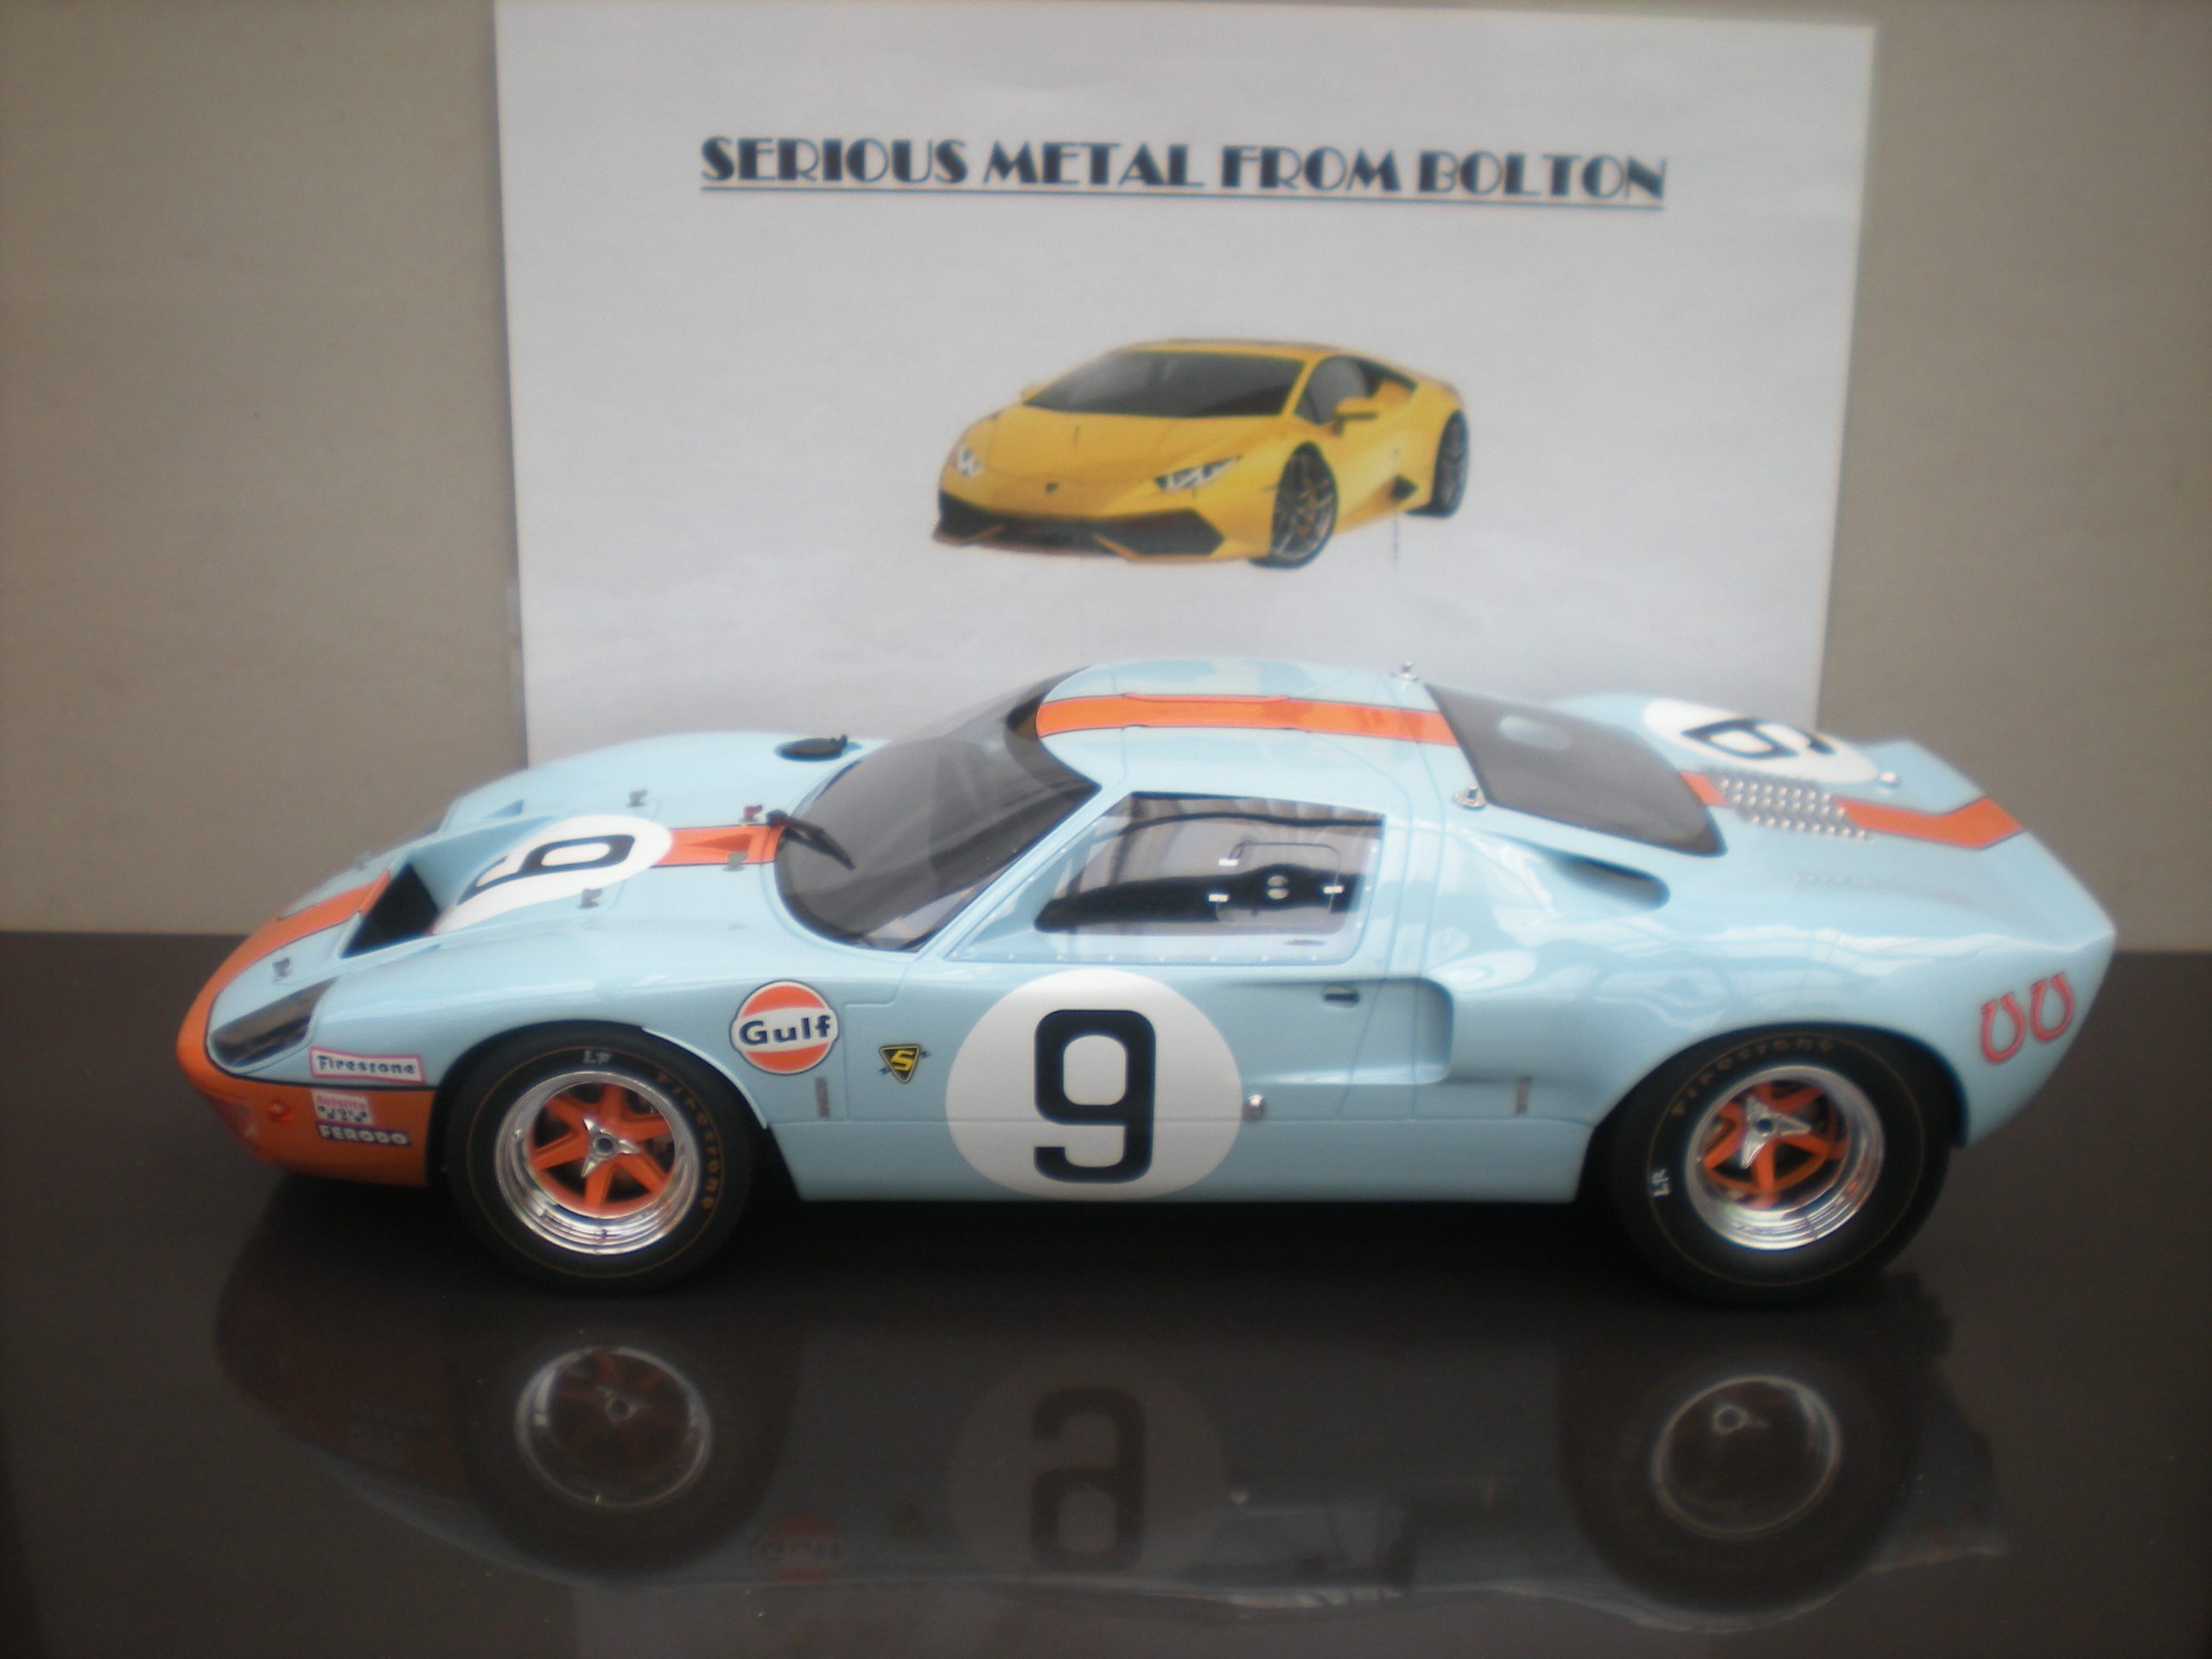 CMR 12005 FORD GT40 MK1 WINNER LE MANS 1968 #9 RODRIGUEZ BIANCHI 1:12 –  Serious Metal From Bolton